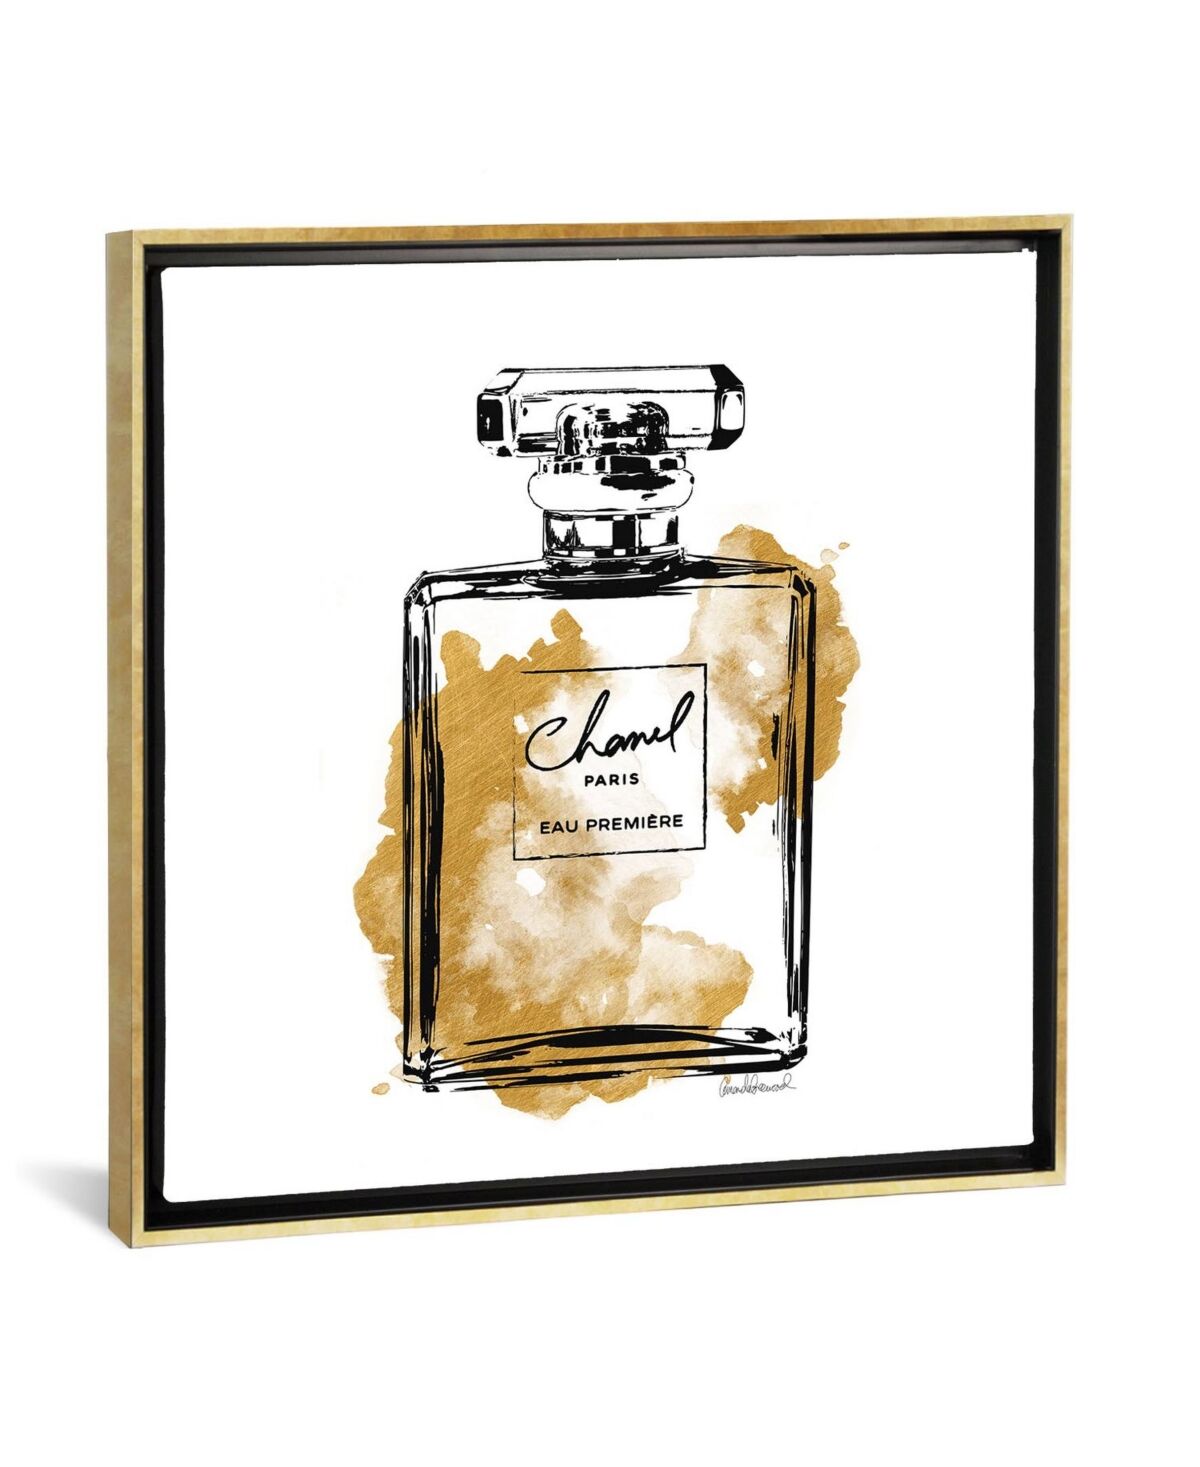 iCanvas Black and Gold Perfume Bottle by Amanda Greenwood Gallery-Wrapped Canvas Print - 18